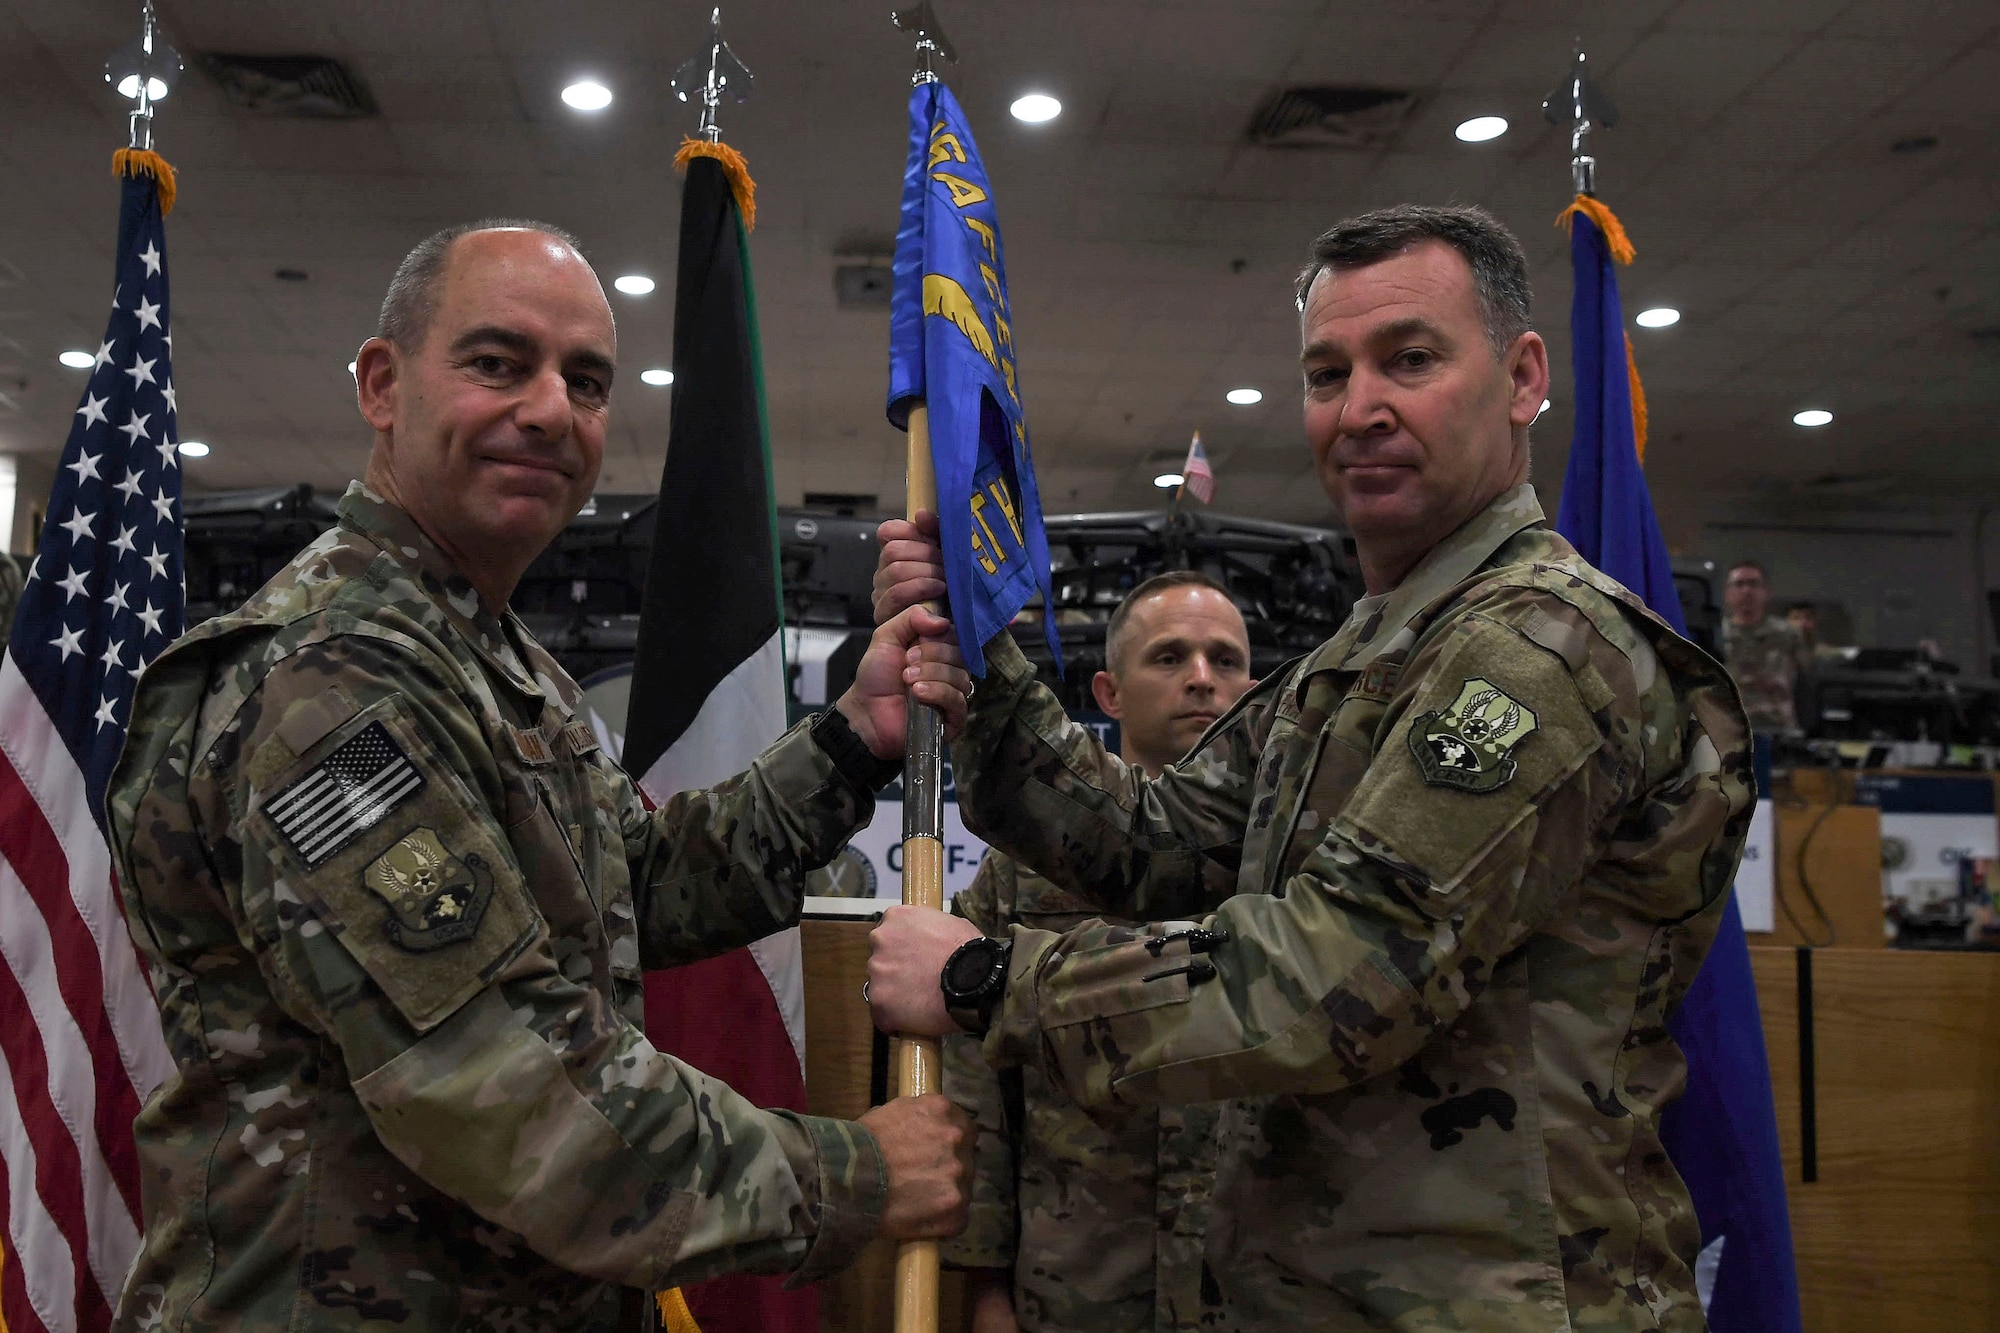 Maj. Gen. Chad Franks (right), 9th Air Expeditionary Task Force - Levant incoming commander, assumes command from Lt. Gen. Jeffrey Harrigian, United States Air Force Central Command commander, during a change of command ceremony May 5, 2018, at an undisclosed location in Southwest Asia.